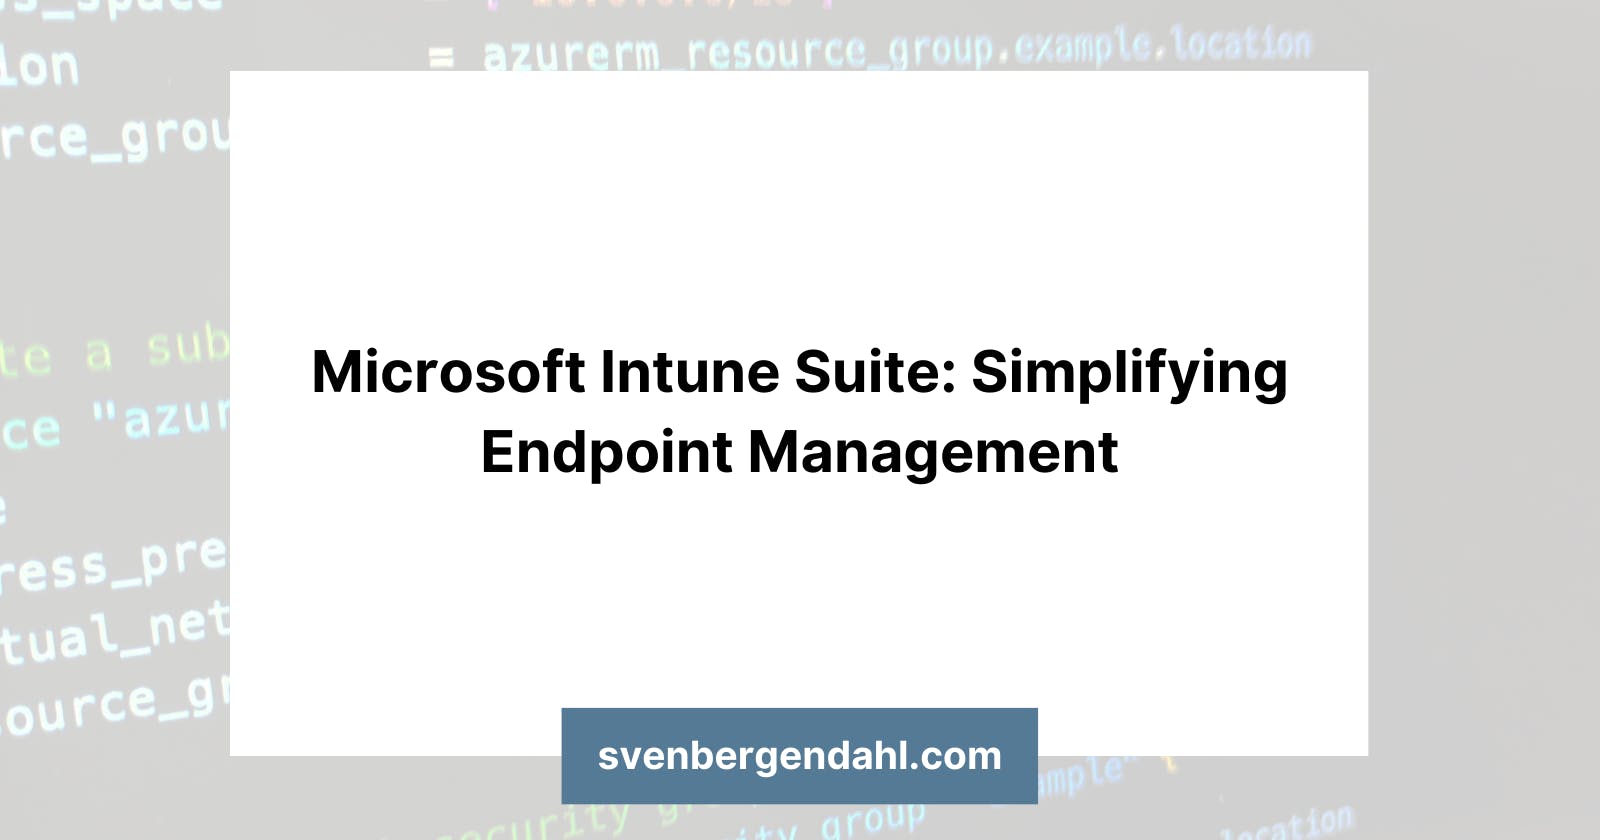 Microsoft Intune Suite: Simplifying Endpoint Management